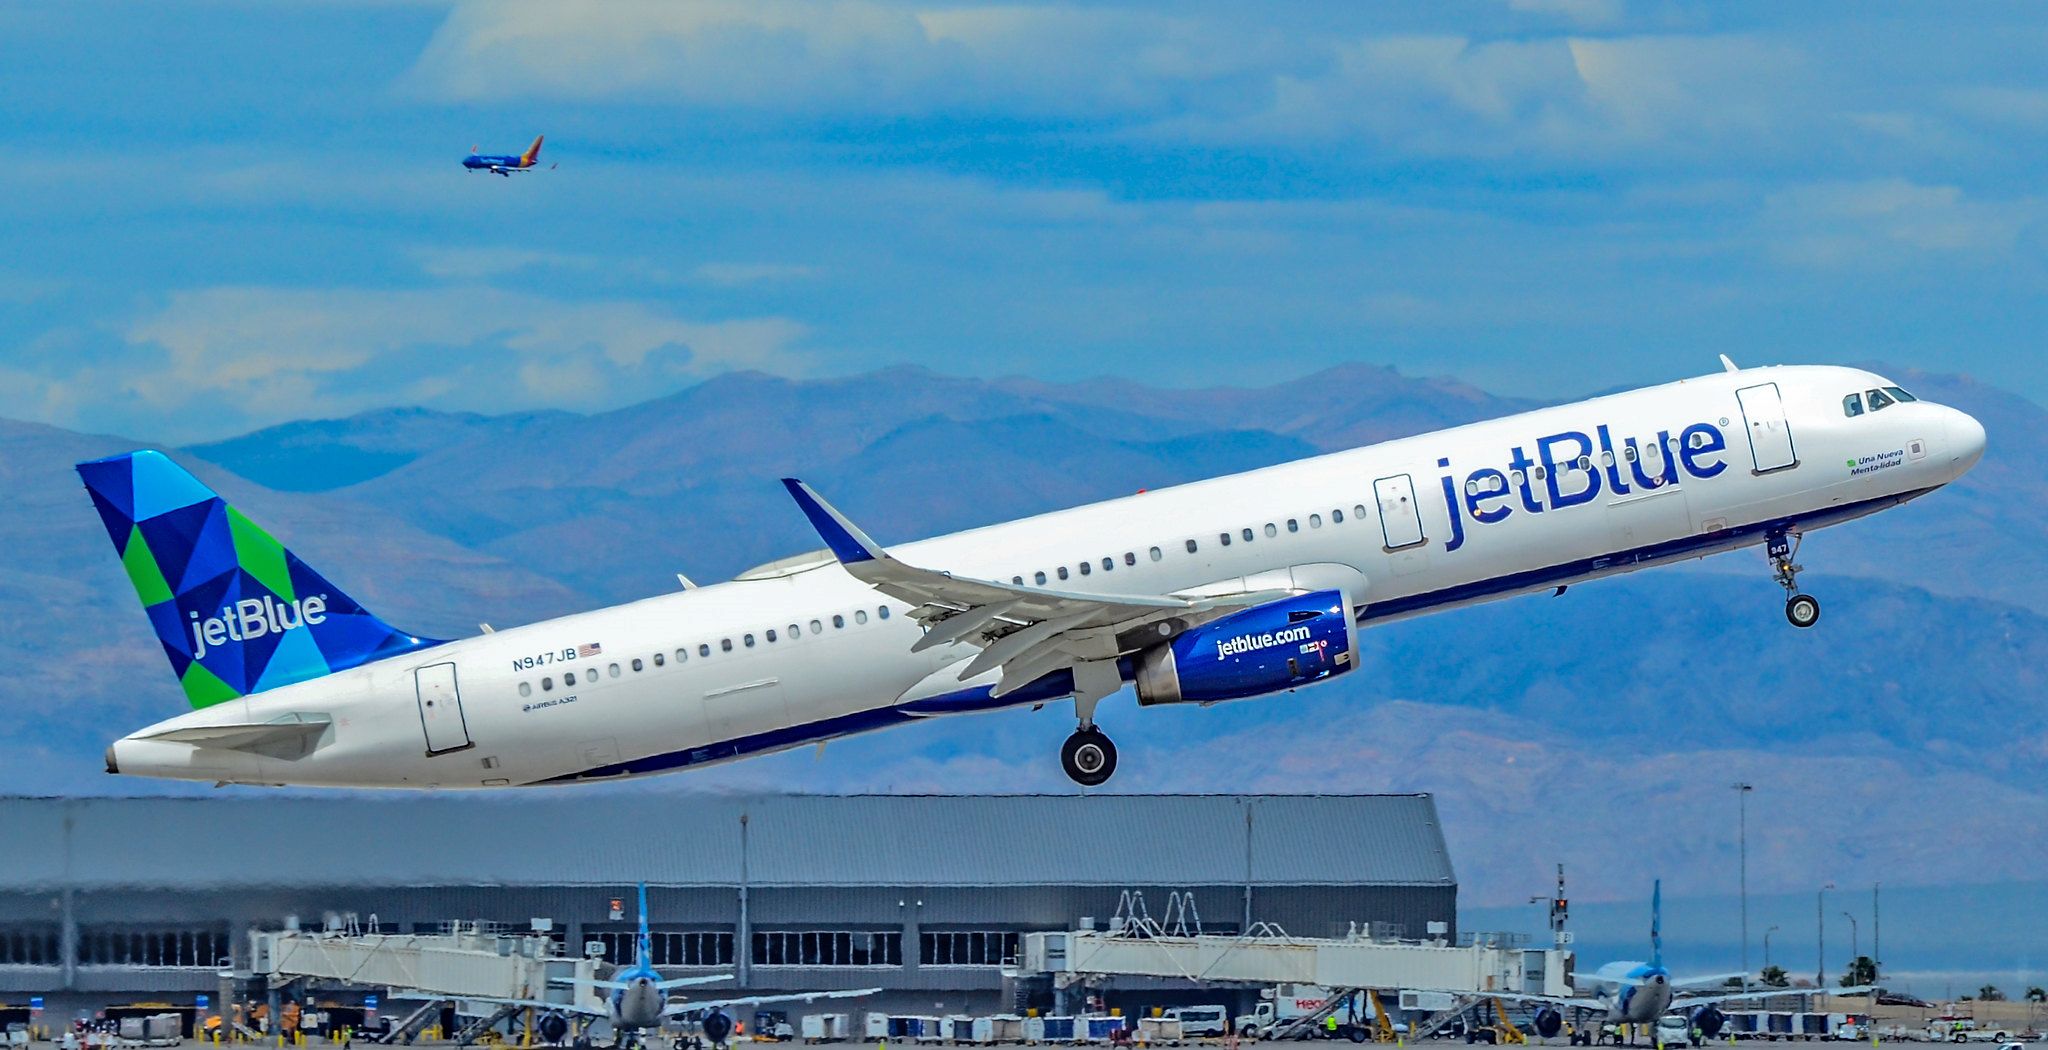 JetBlue offering flights to St. Kitts and Nevis in the Caribbean